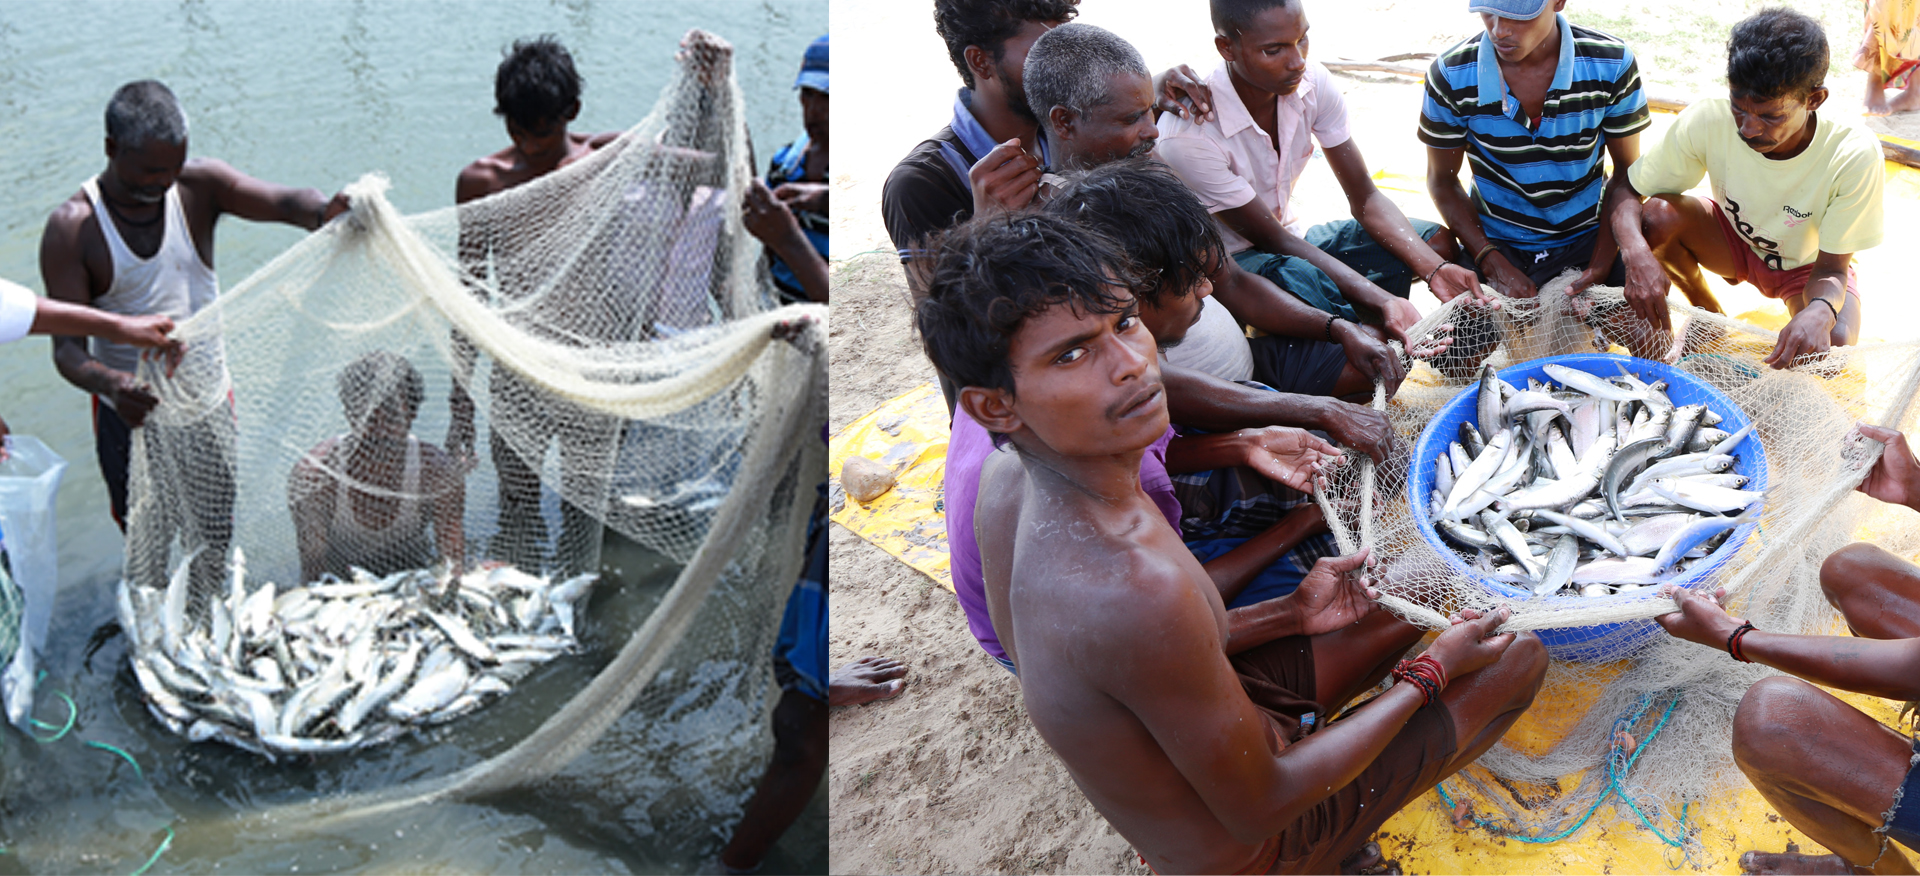 Successful demonstration of Milkfish (Chanos chanos) farming in brackishwater penculture system in Pulicat, Tamilnadu using hatchery produced seeds, as a livelihood opportunity for the tribal families, by ICAR-CIBA, Chennai